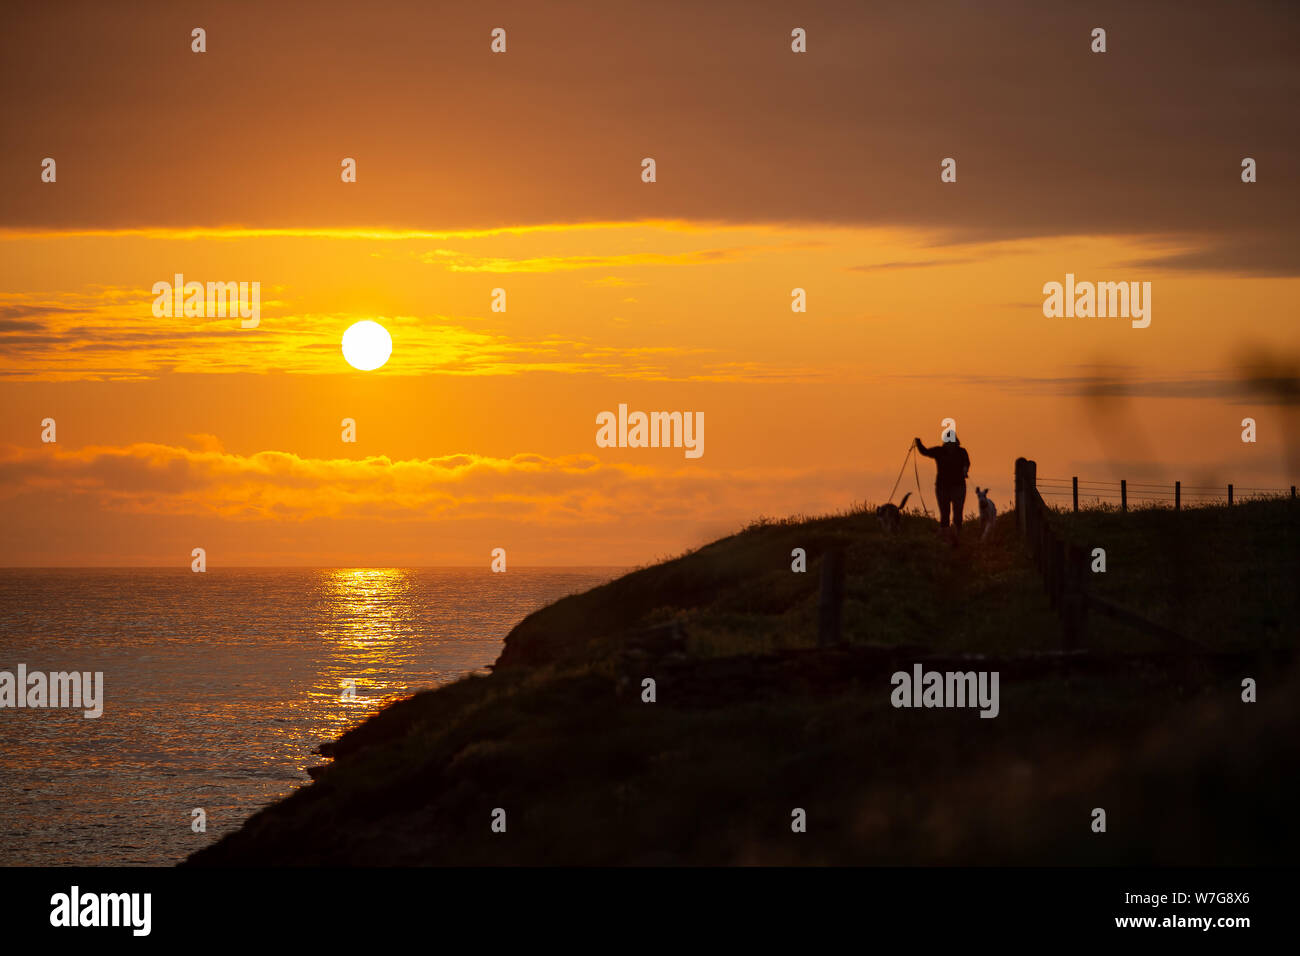 Sunset view over the Bay of Skaill, Orkney, Scotland Stock Photo